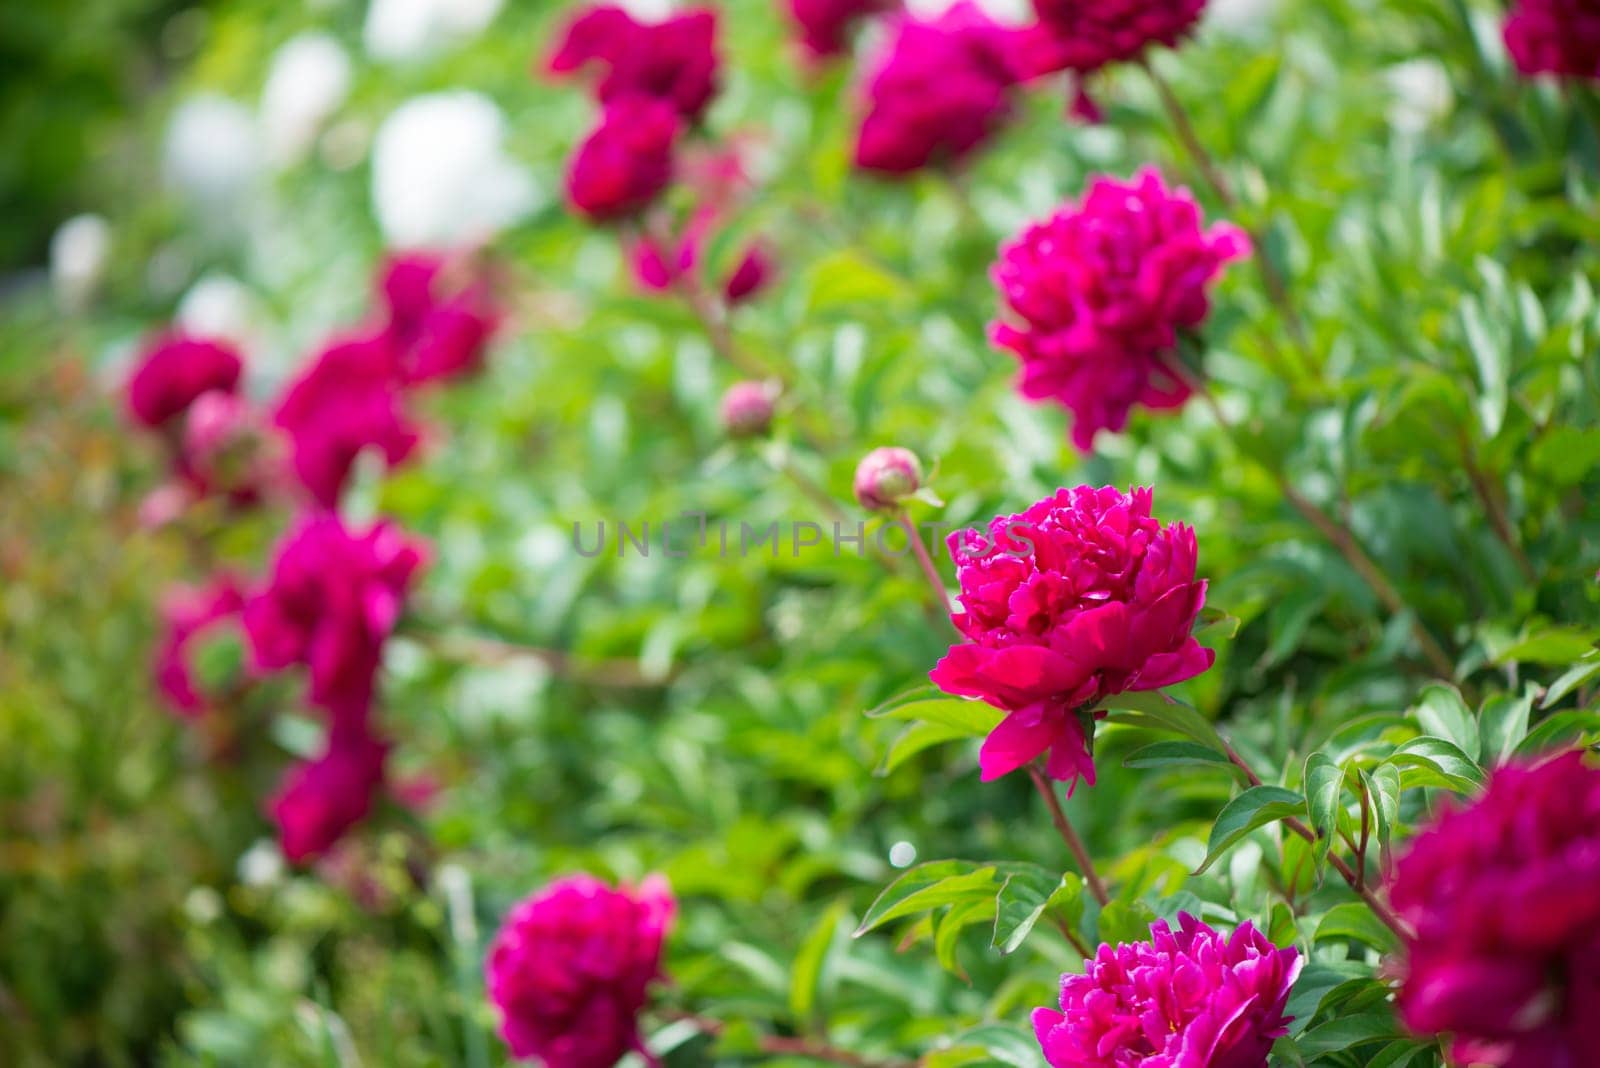 The peony is pink. Beautiful pink flowers. Many peony buds. Flower grove. Home garden with lush peonies.